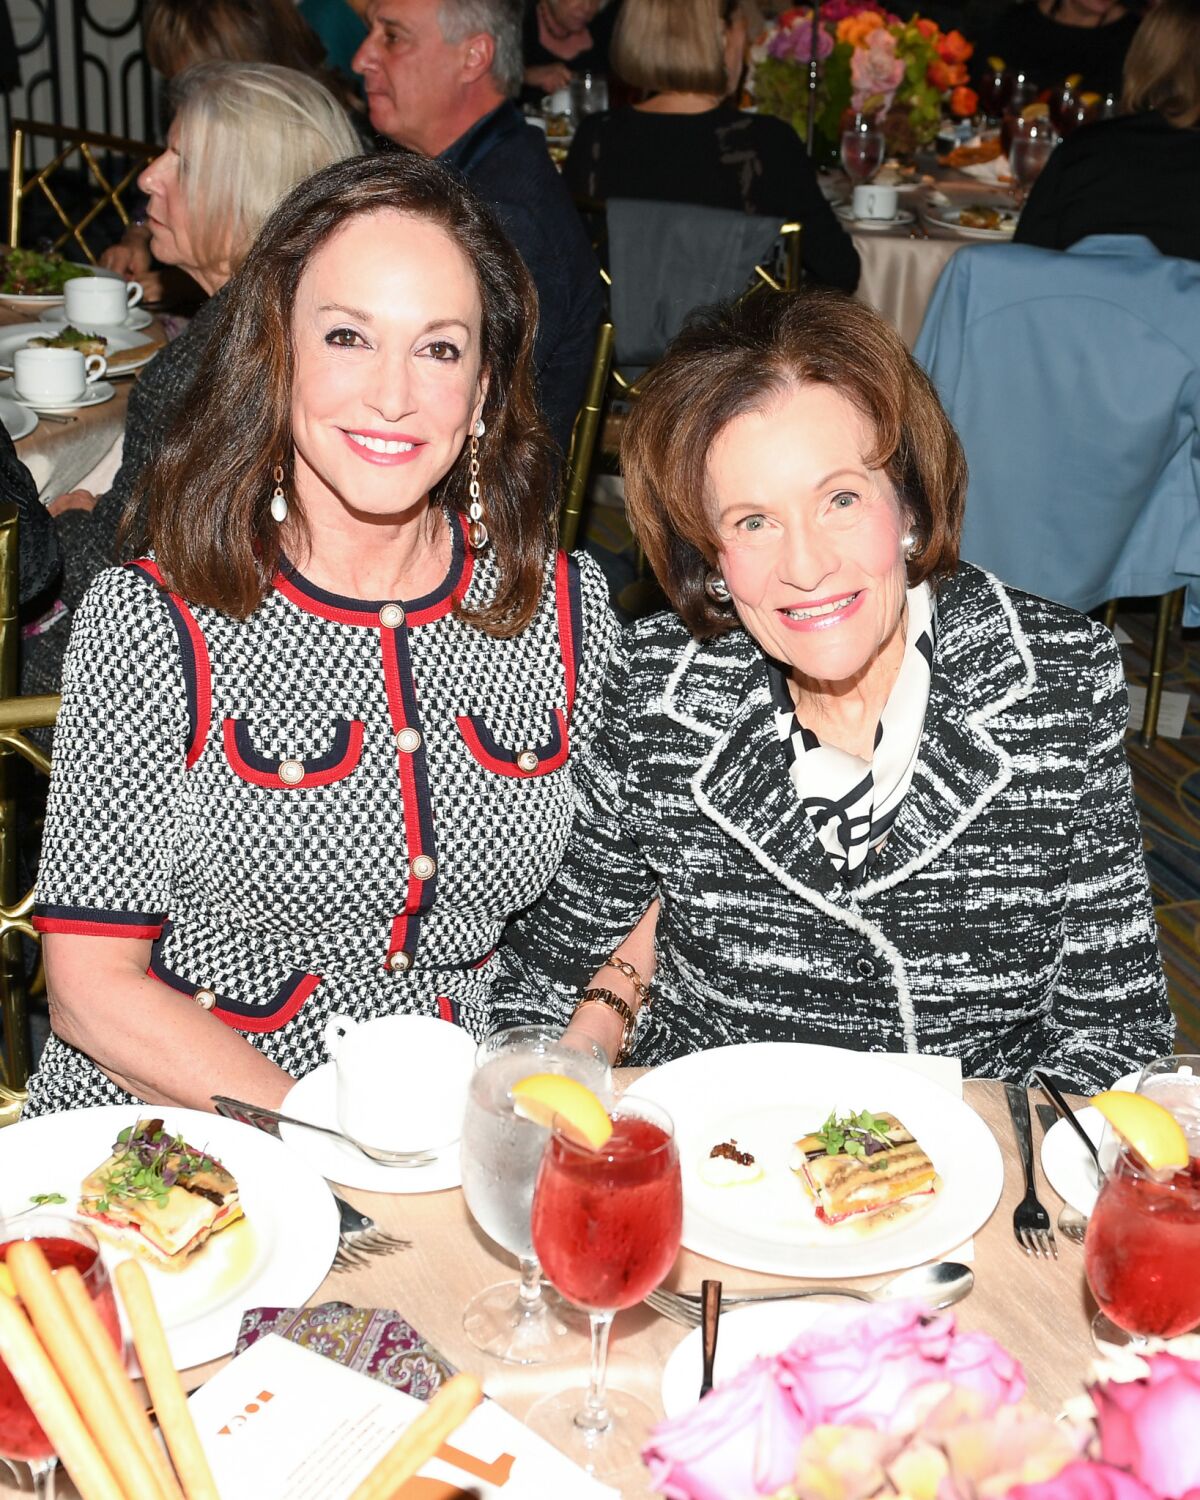 Lilly Tartikoff Karatz and Edythe Broad at MOCA's Distinguished Women in the Arts luncheon.